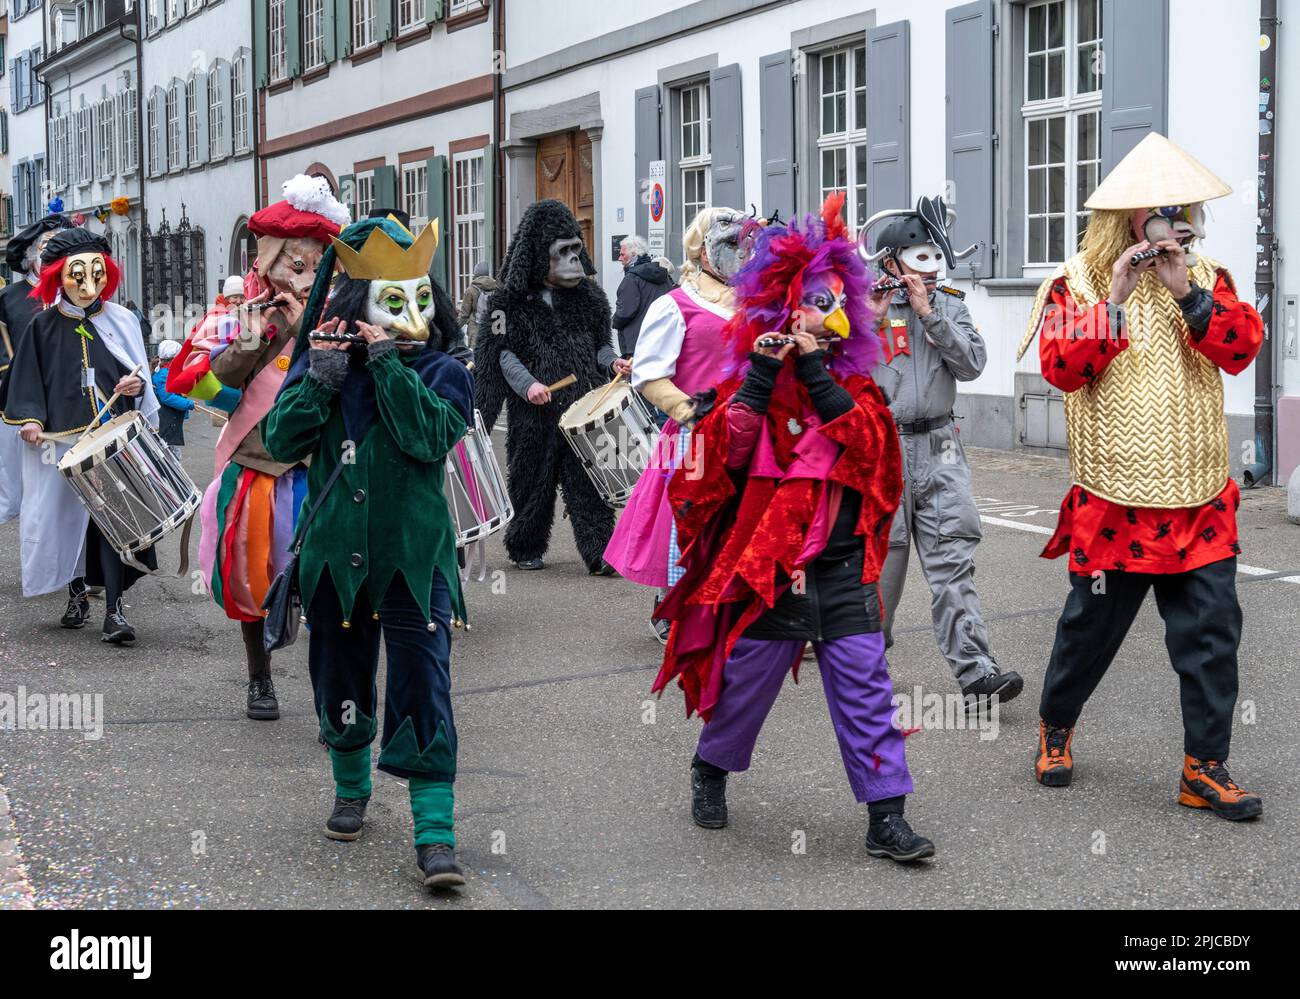 clique at the Basel Switzerland Carnival or Fasnacht children's parade Stock Photo